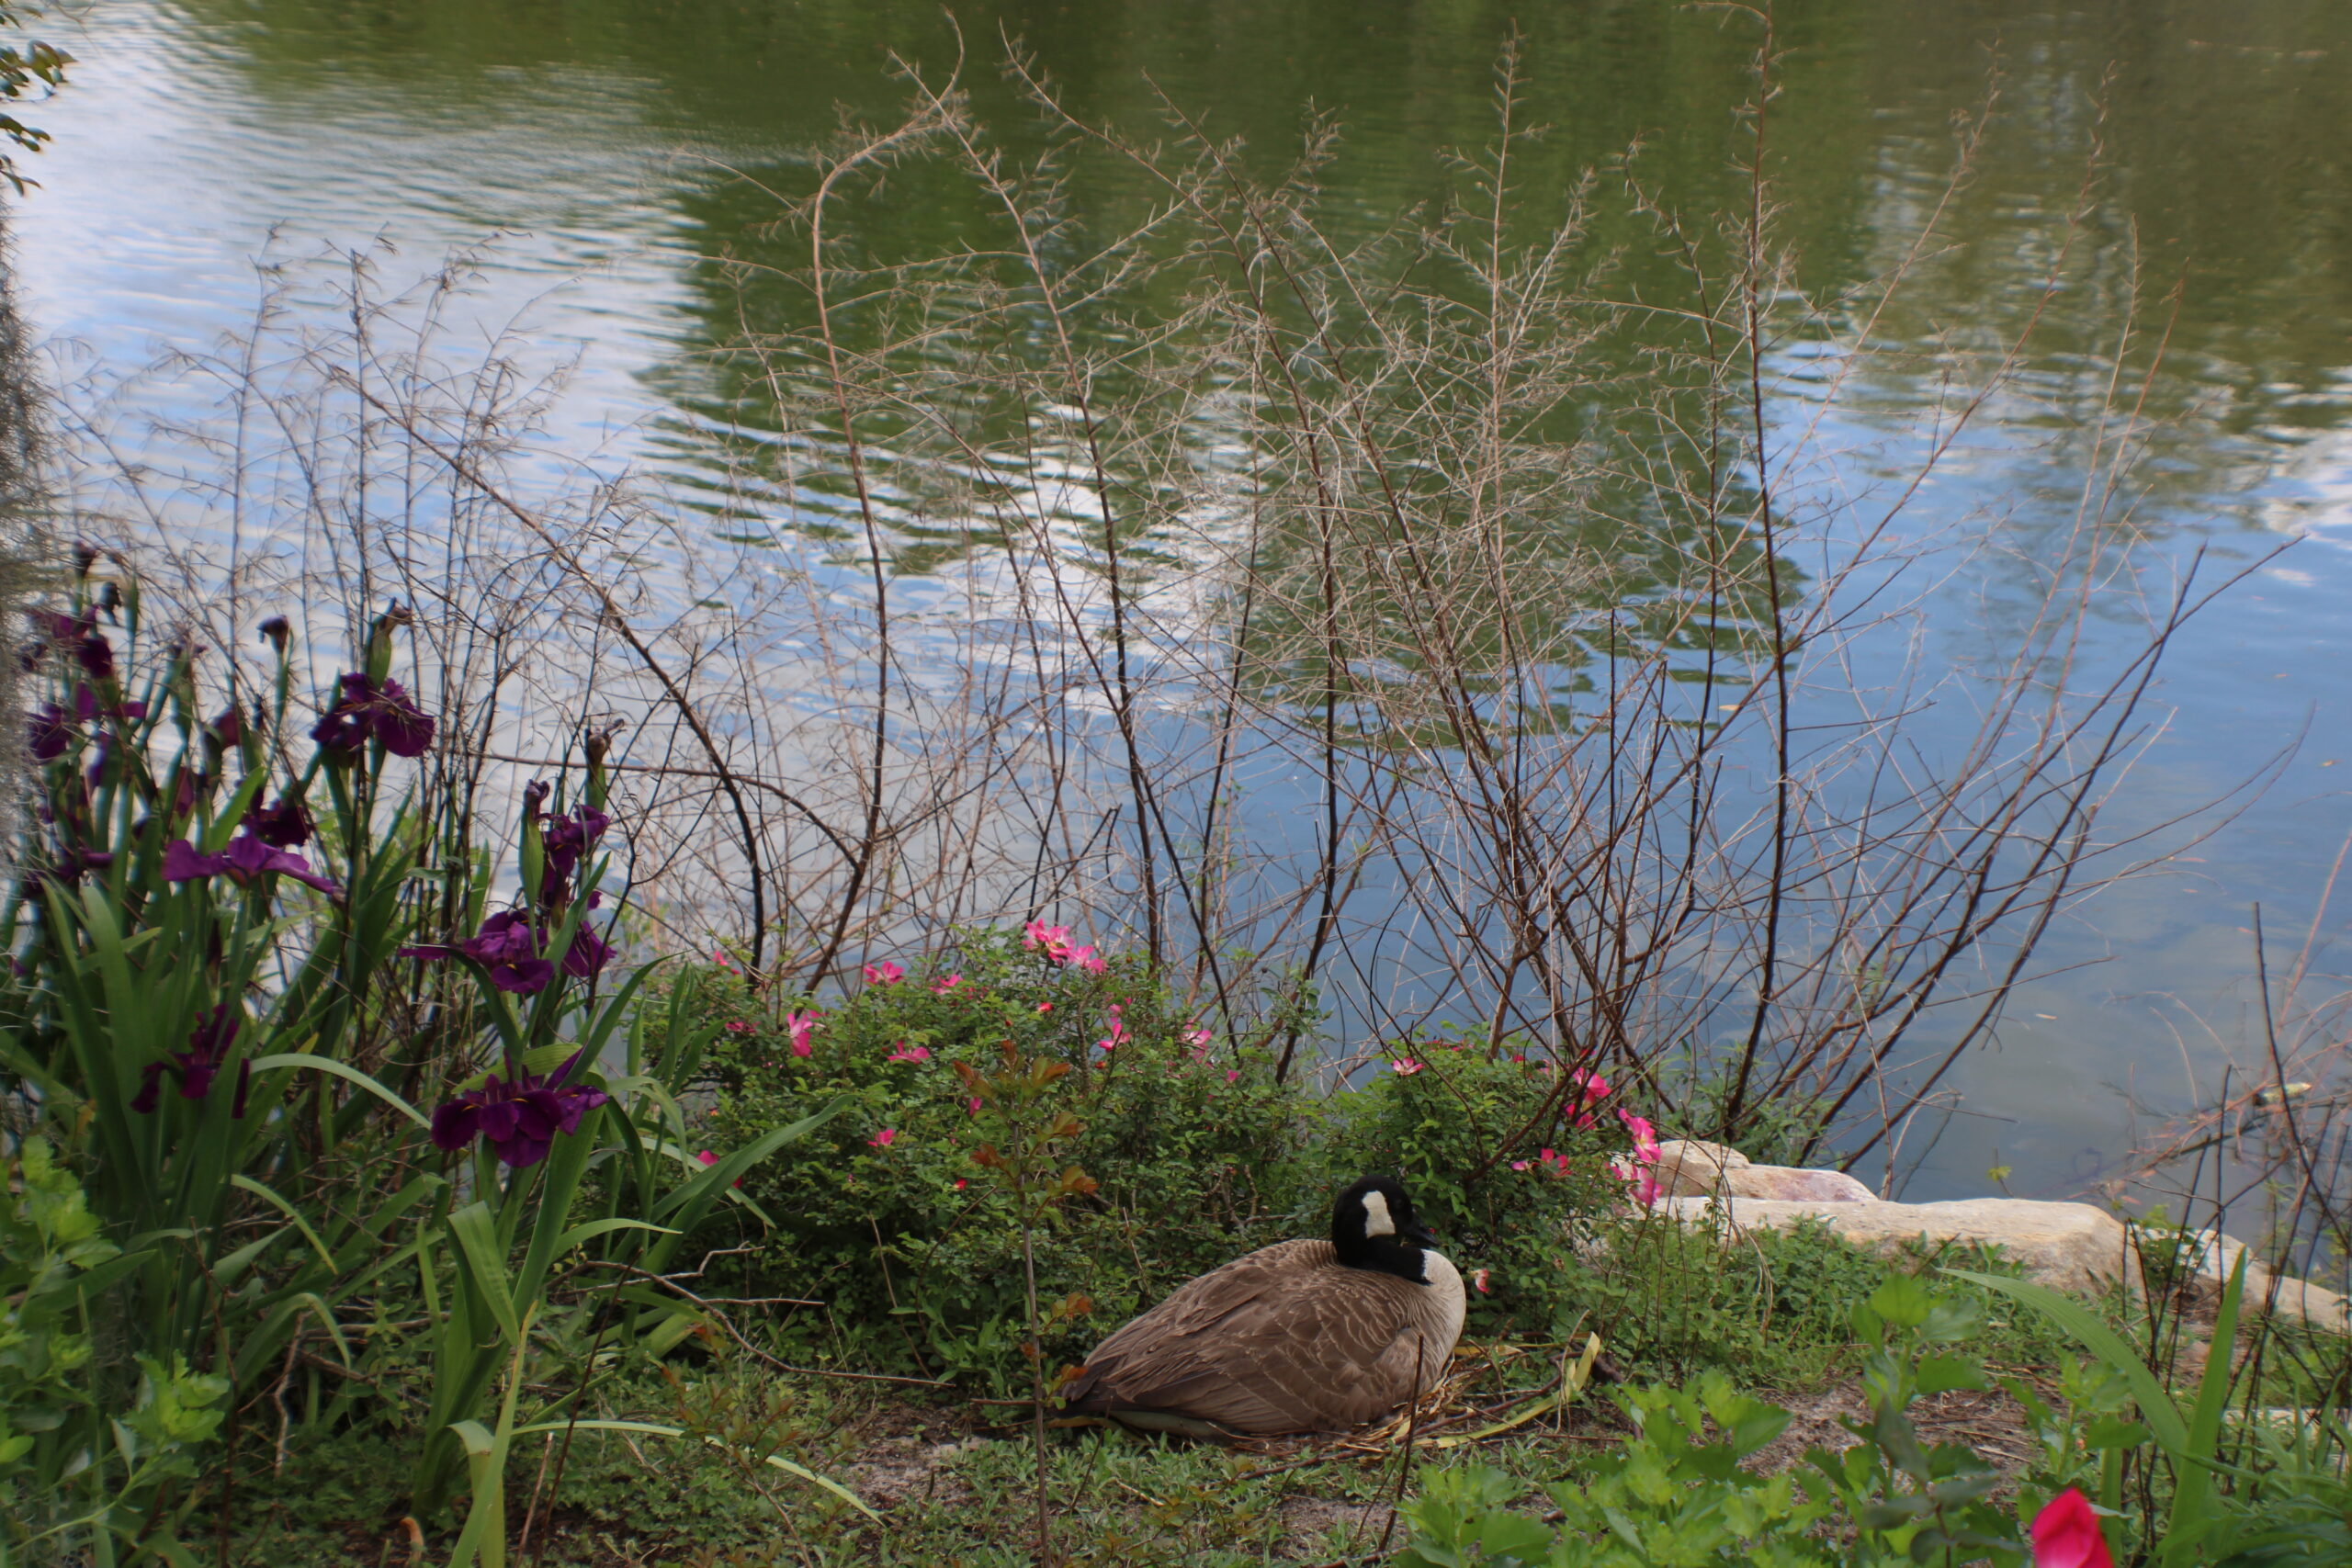 Photo is decorative and taken by a Tallahassee Realtor. It shows a Canada goose sitting on a nest next to a pond.